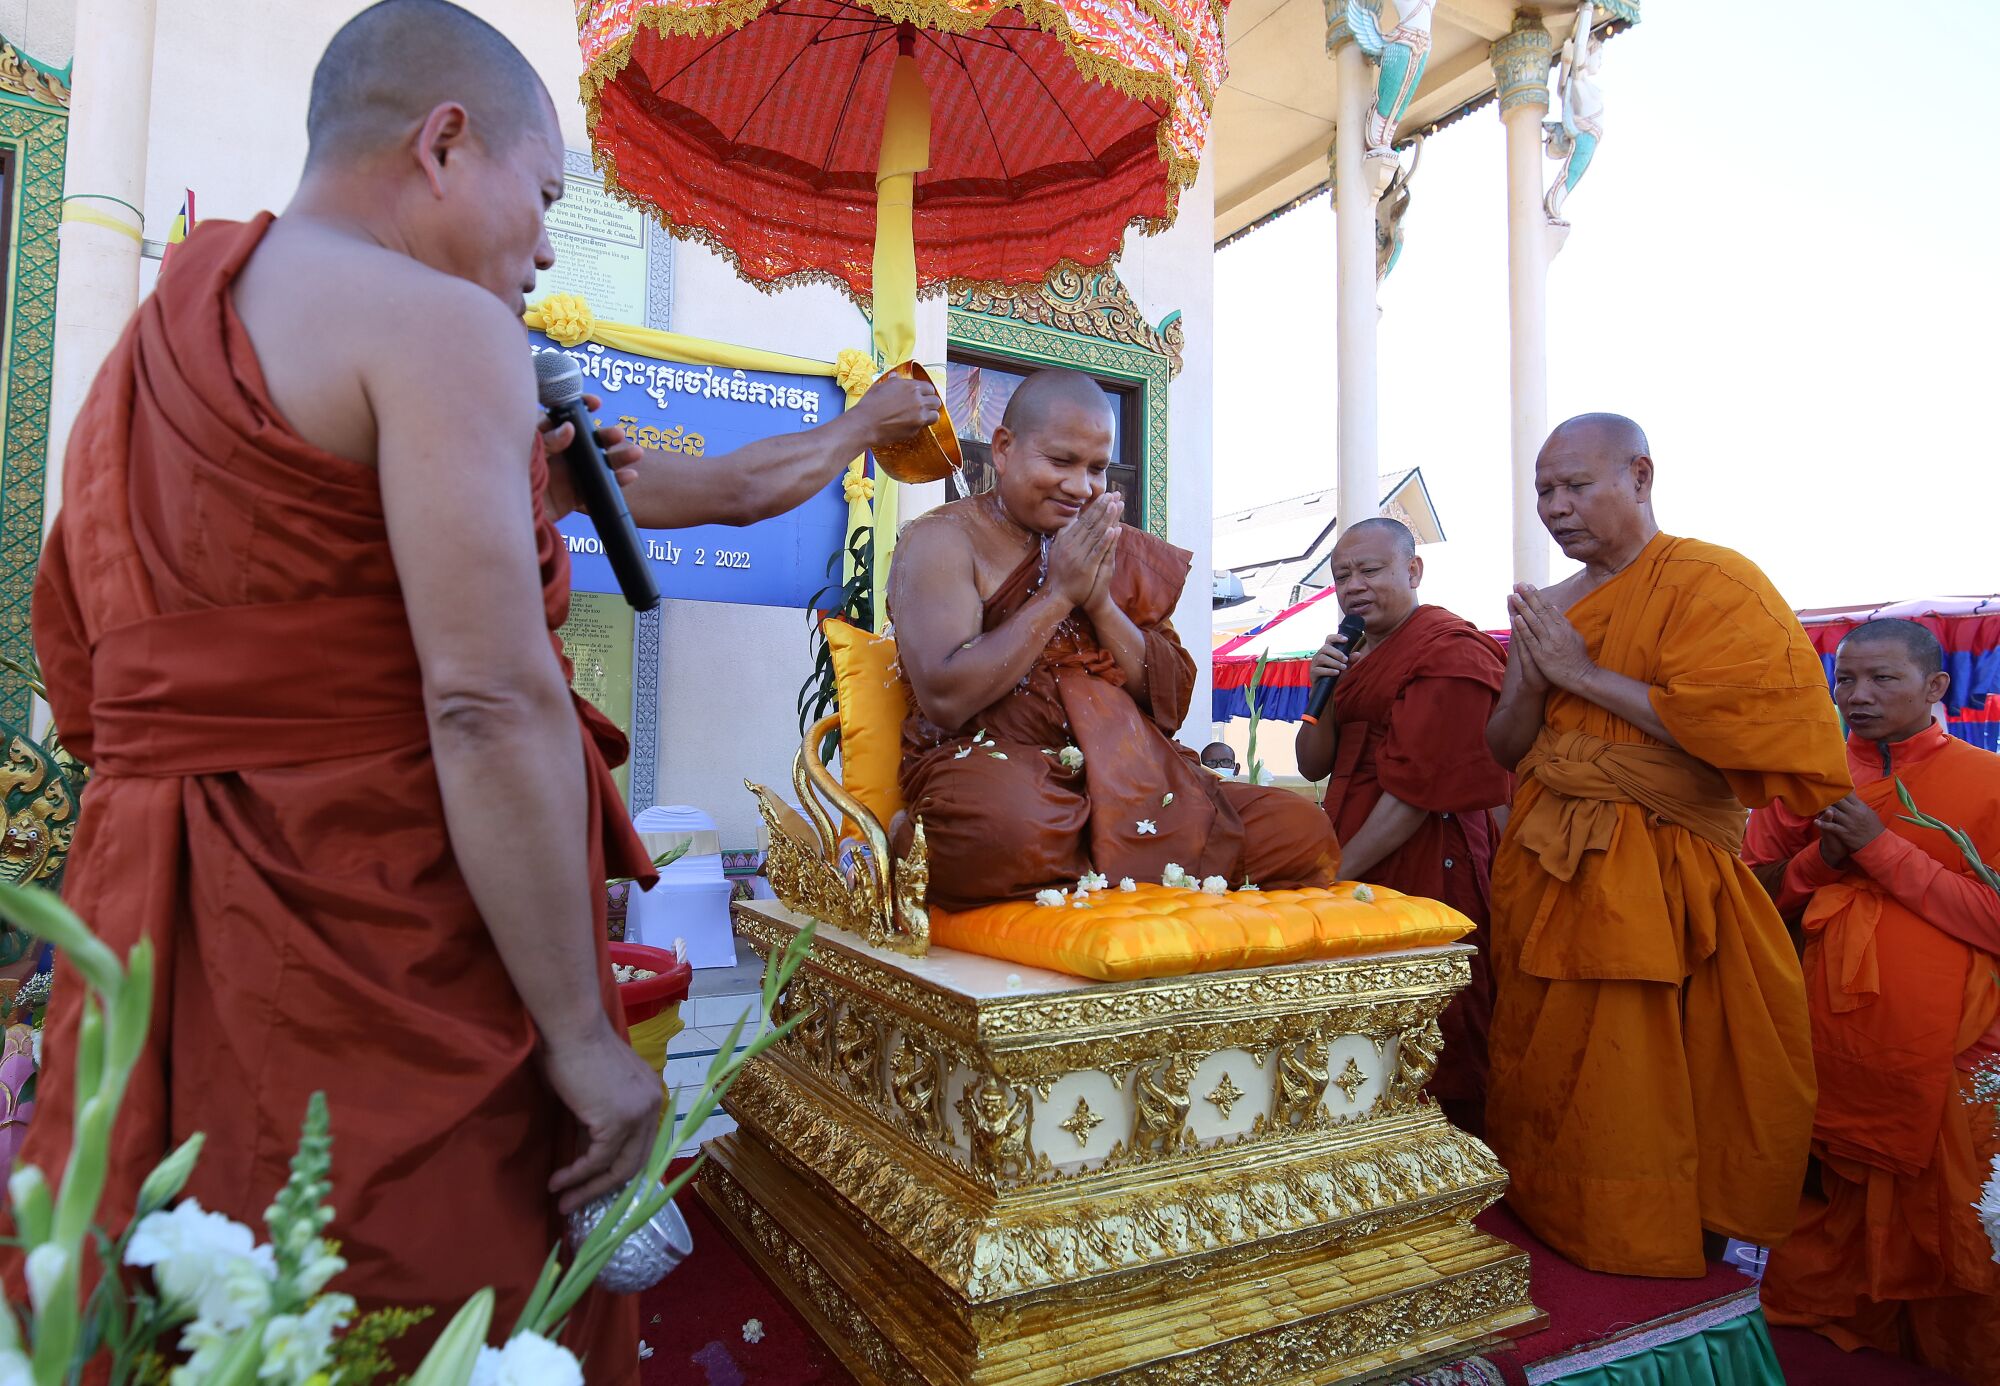 The temple abbot, Say Bunthon, center, has holy water poured over him during a special ceremony.